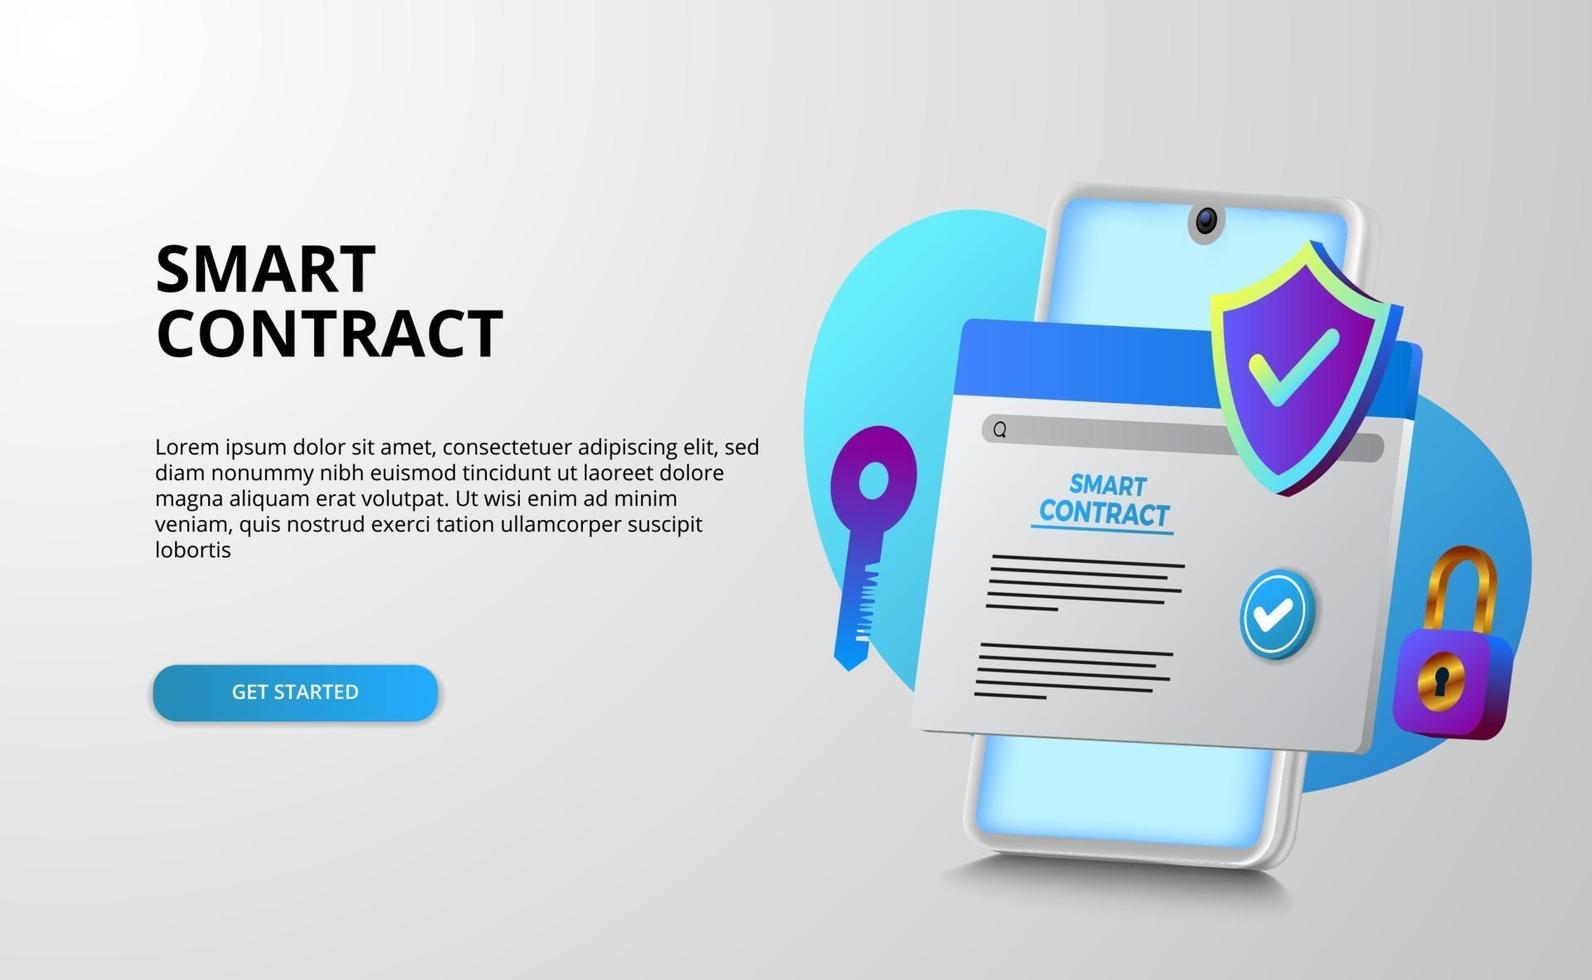 Digital smart contract for electronic sign document agreement security, finance, legal corporate. Mobile web document with shield, key, and padlock for security and protection vector